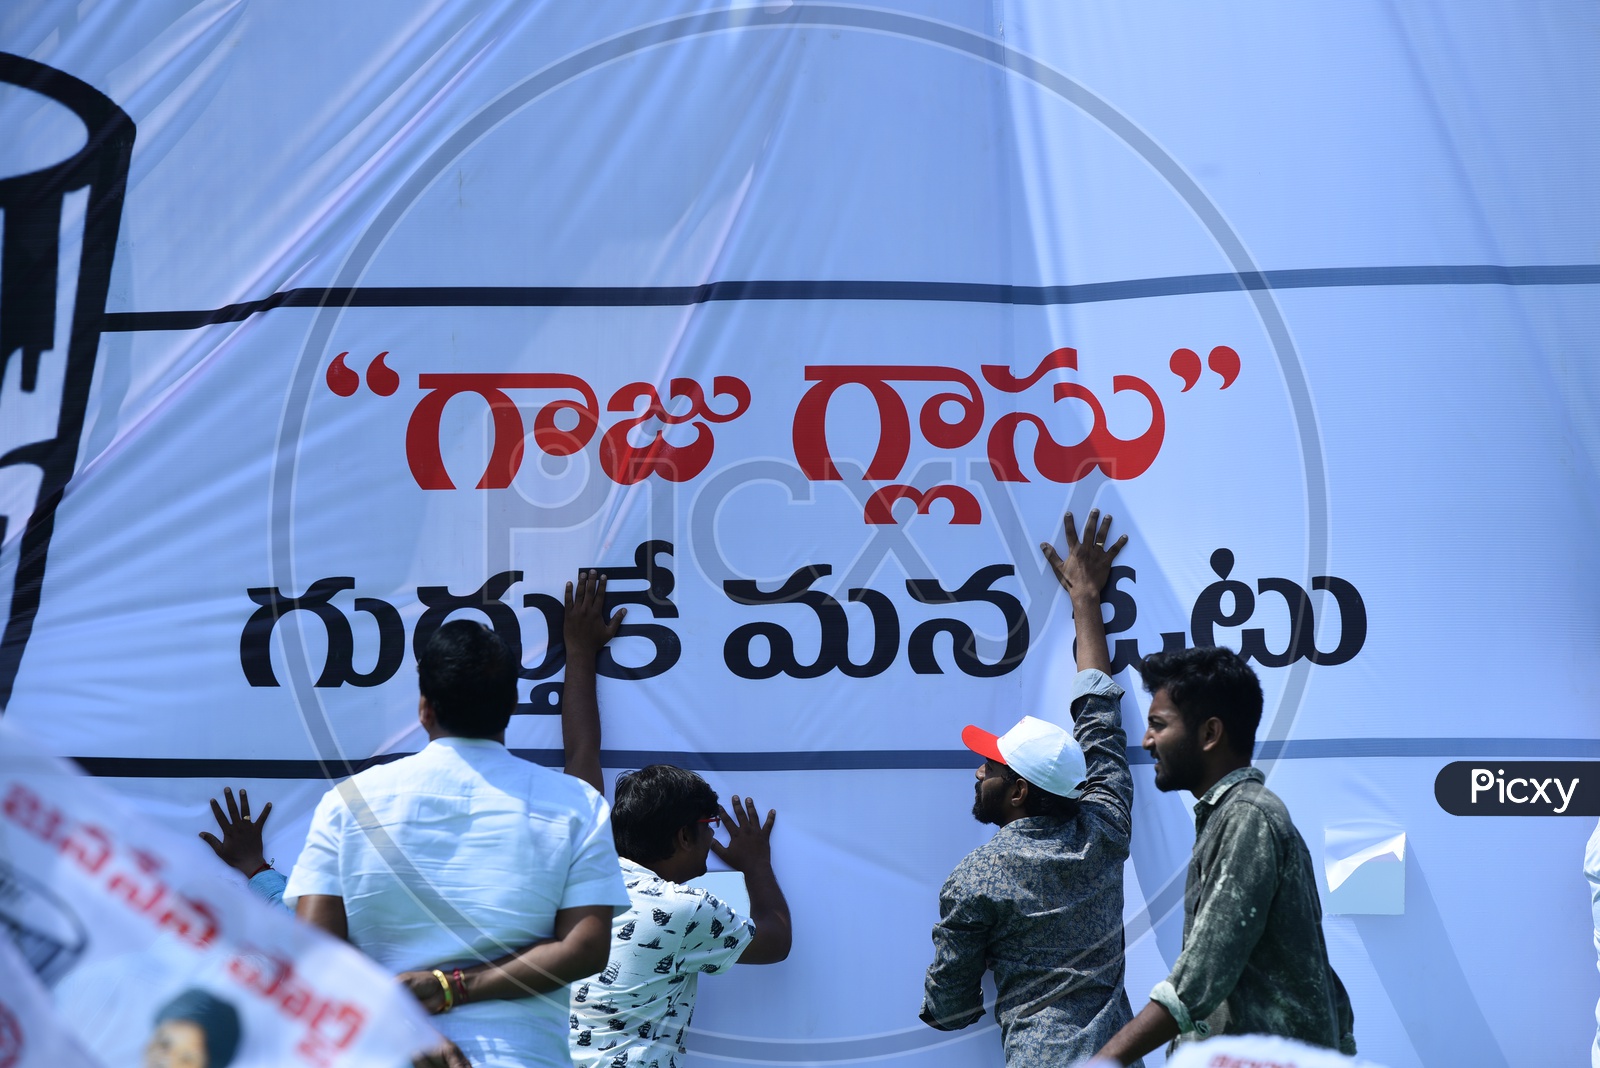 Jana sena party supporters setting up the banner at an election campaign